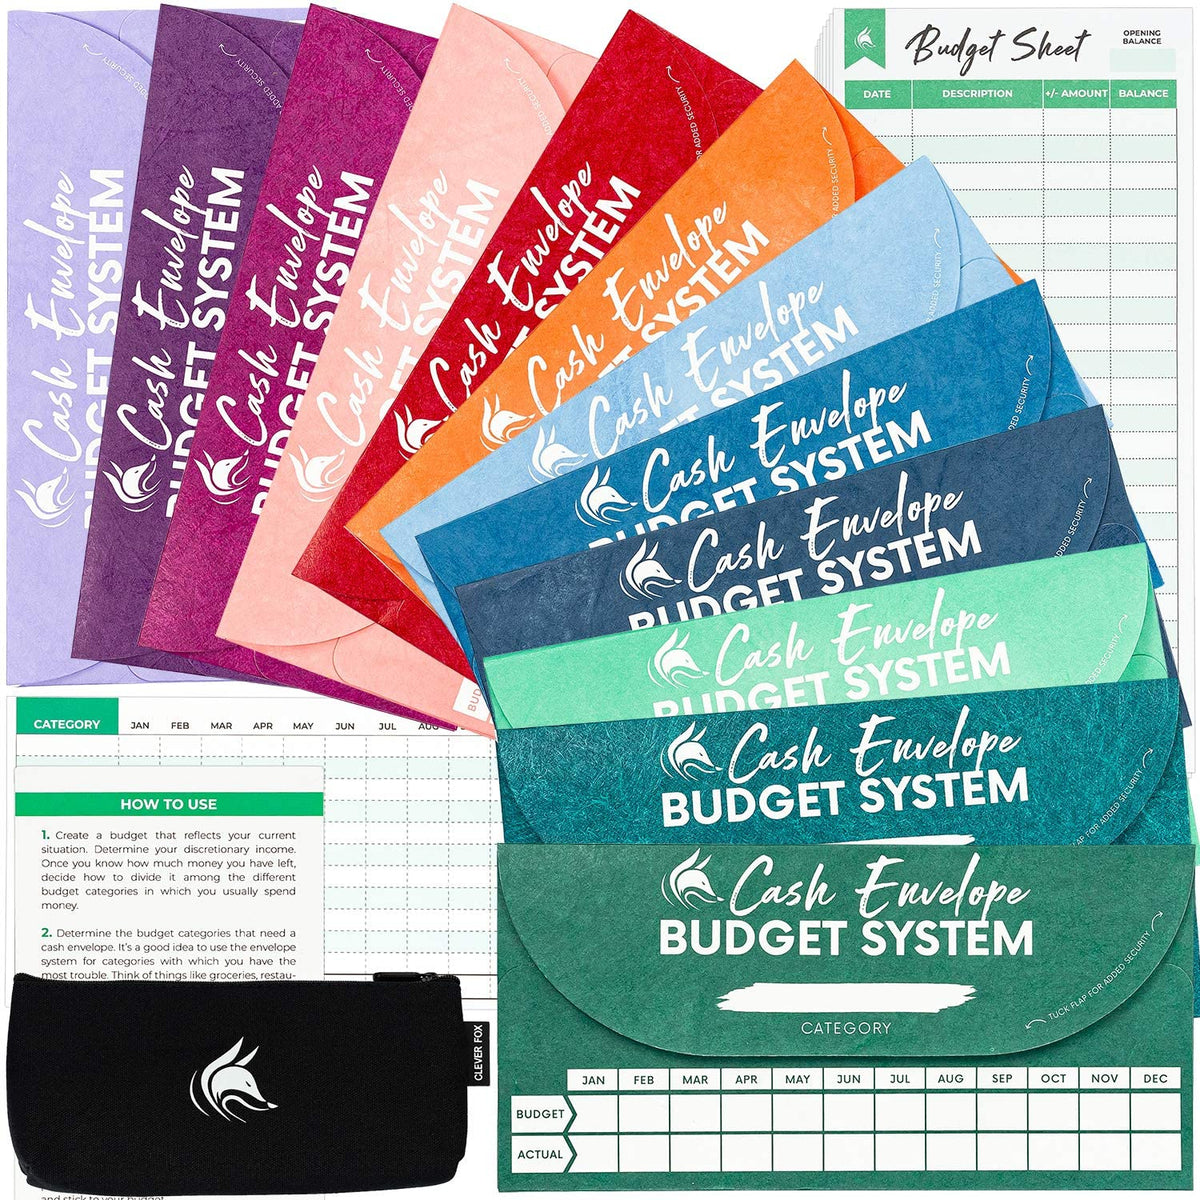 Clever Fox Cash Envelopes for Budget System - Money Envelopes for Budgeting and Saving, 12 Pack of Assorted Colors, Tear and Water Resistant, Includes Carry Pouch & 12 Expense Tracking Budget Sheets